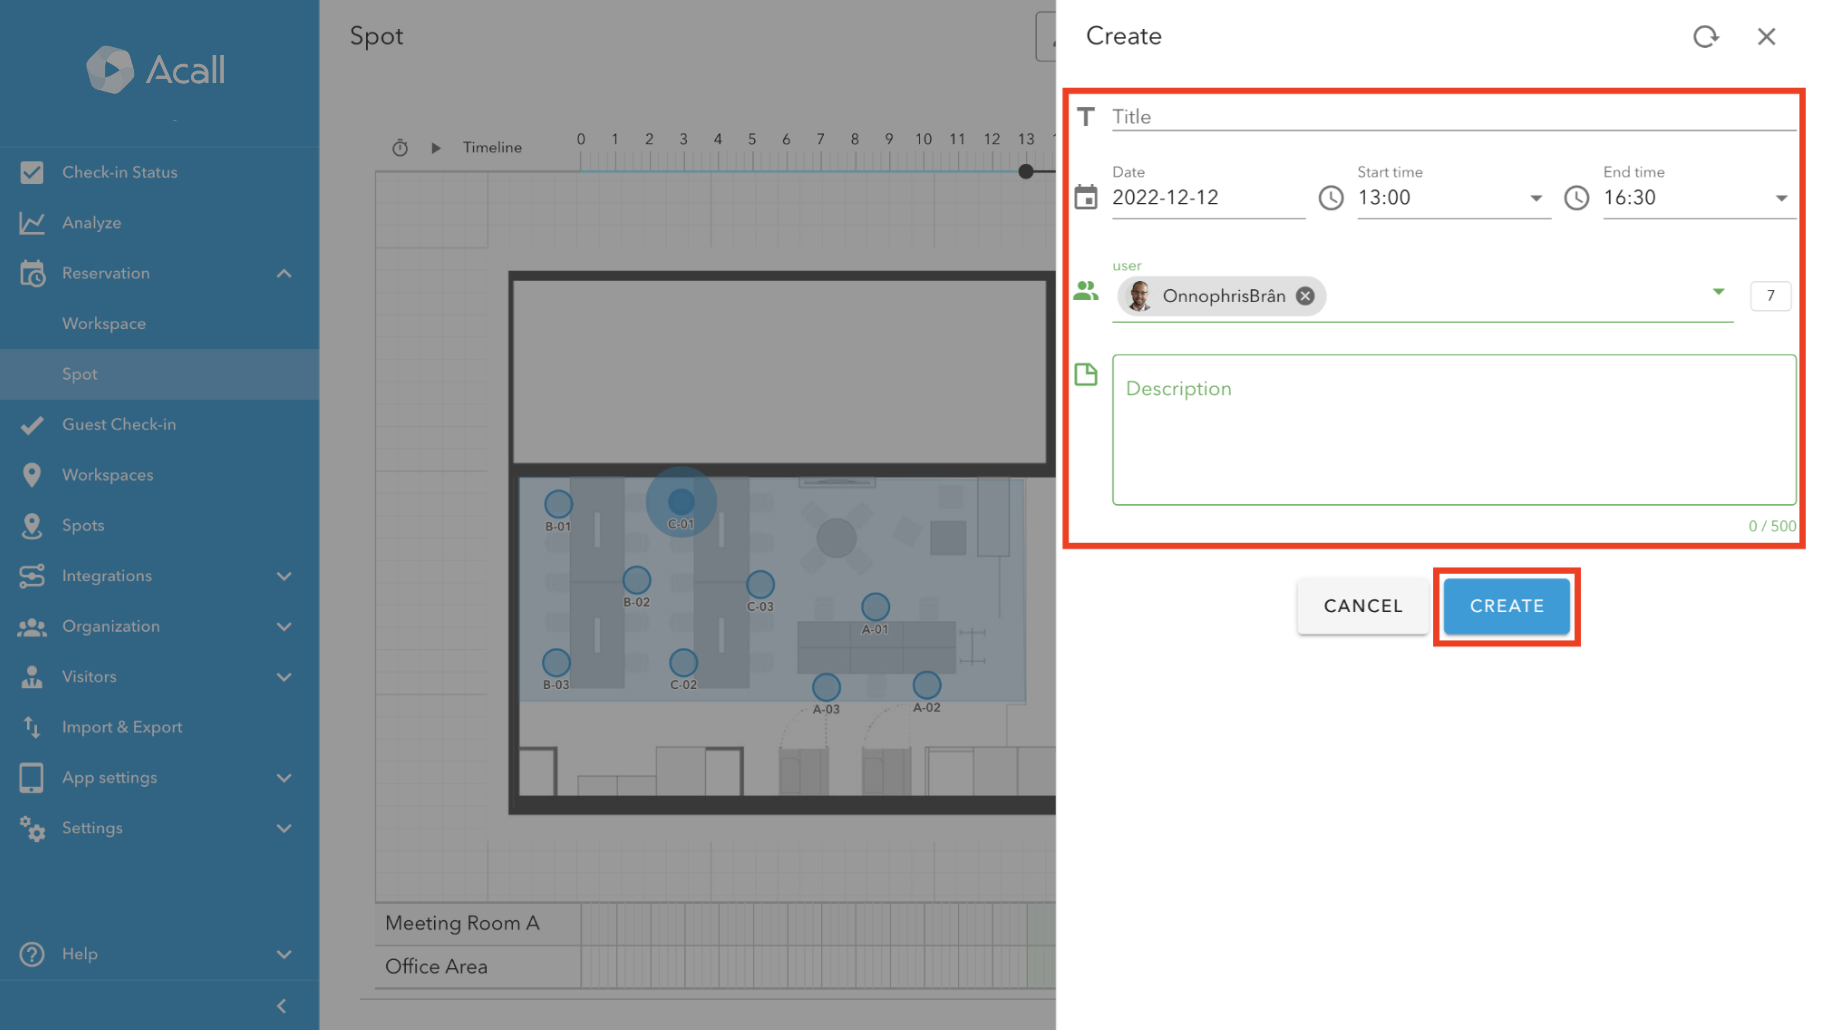 Reserve Your Spot on Floor Map on Acall Portal9.png